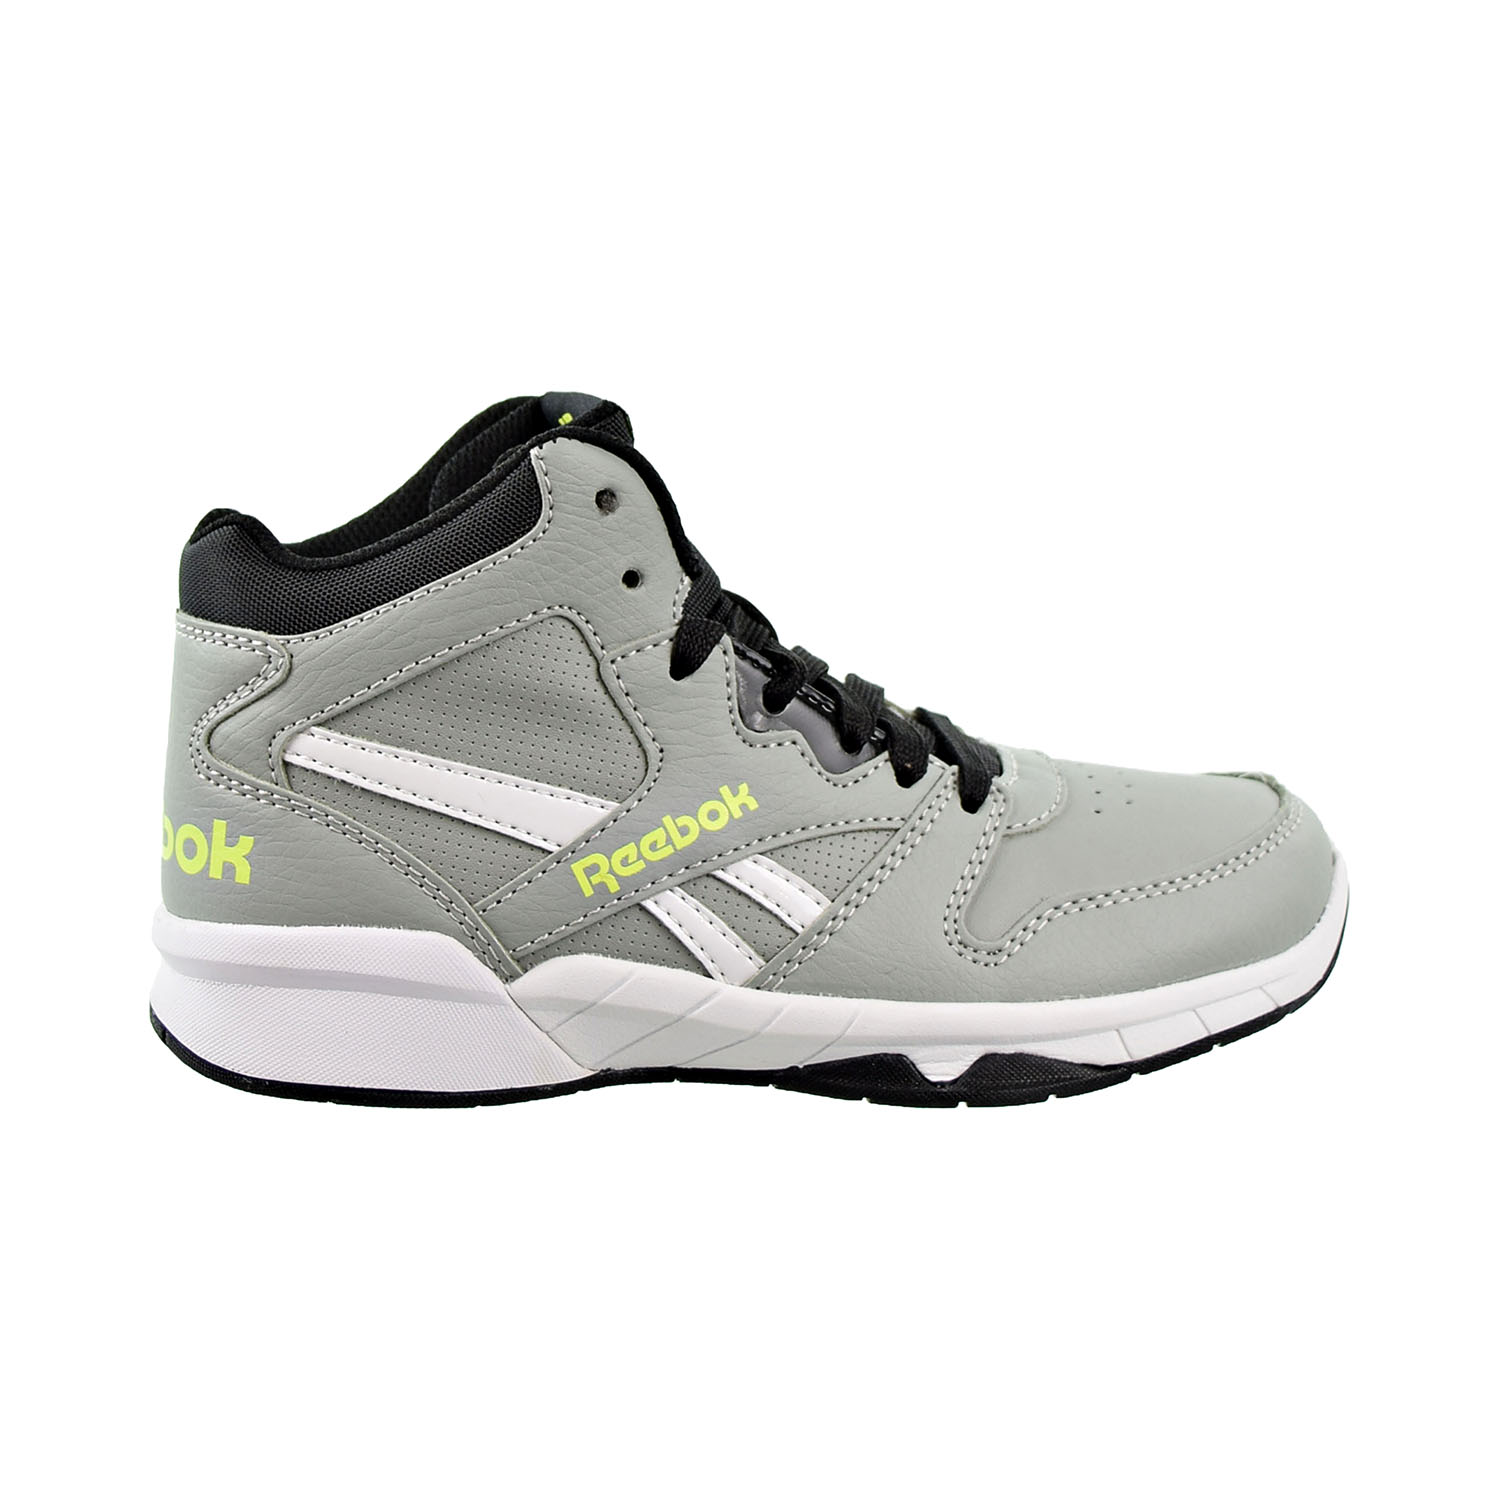 kids basketball shoes online